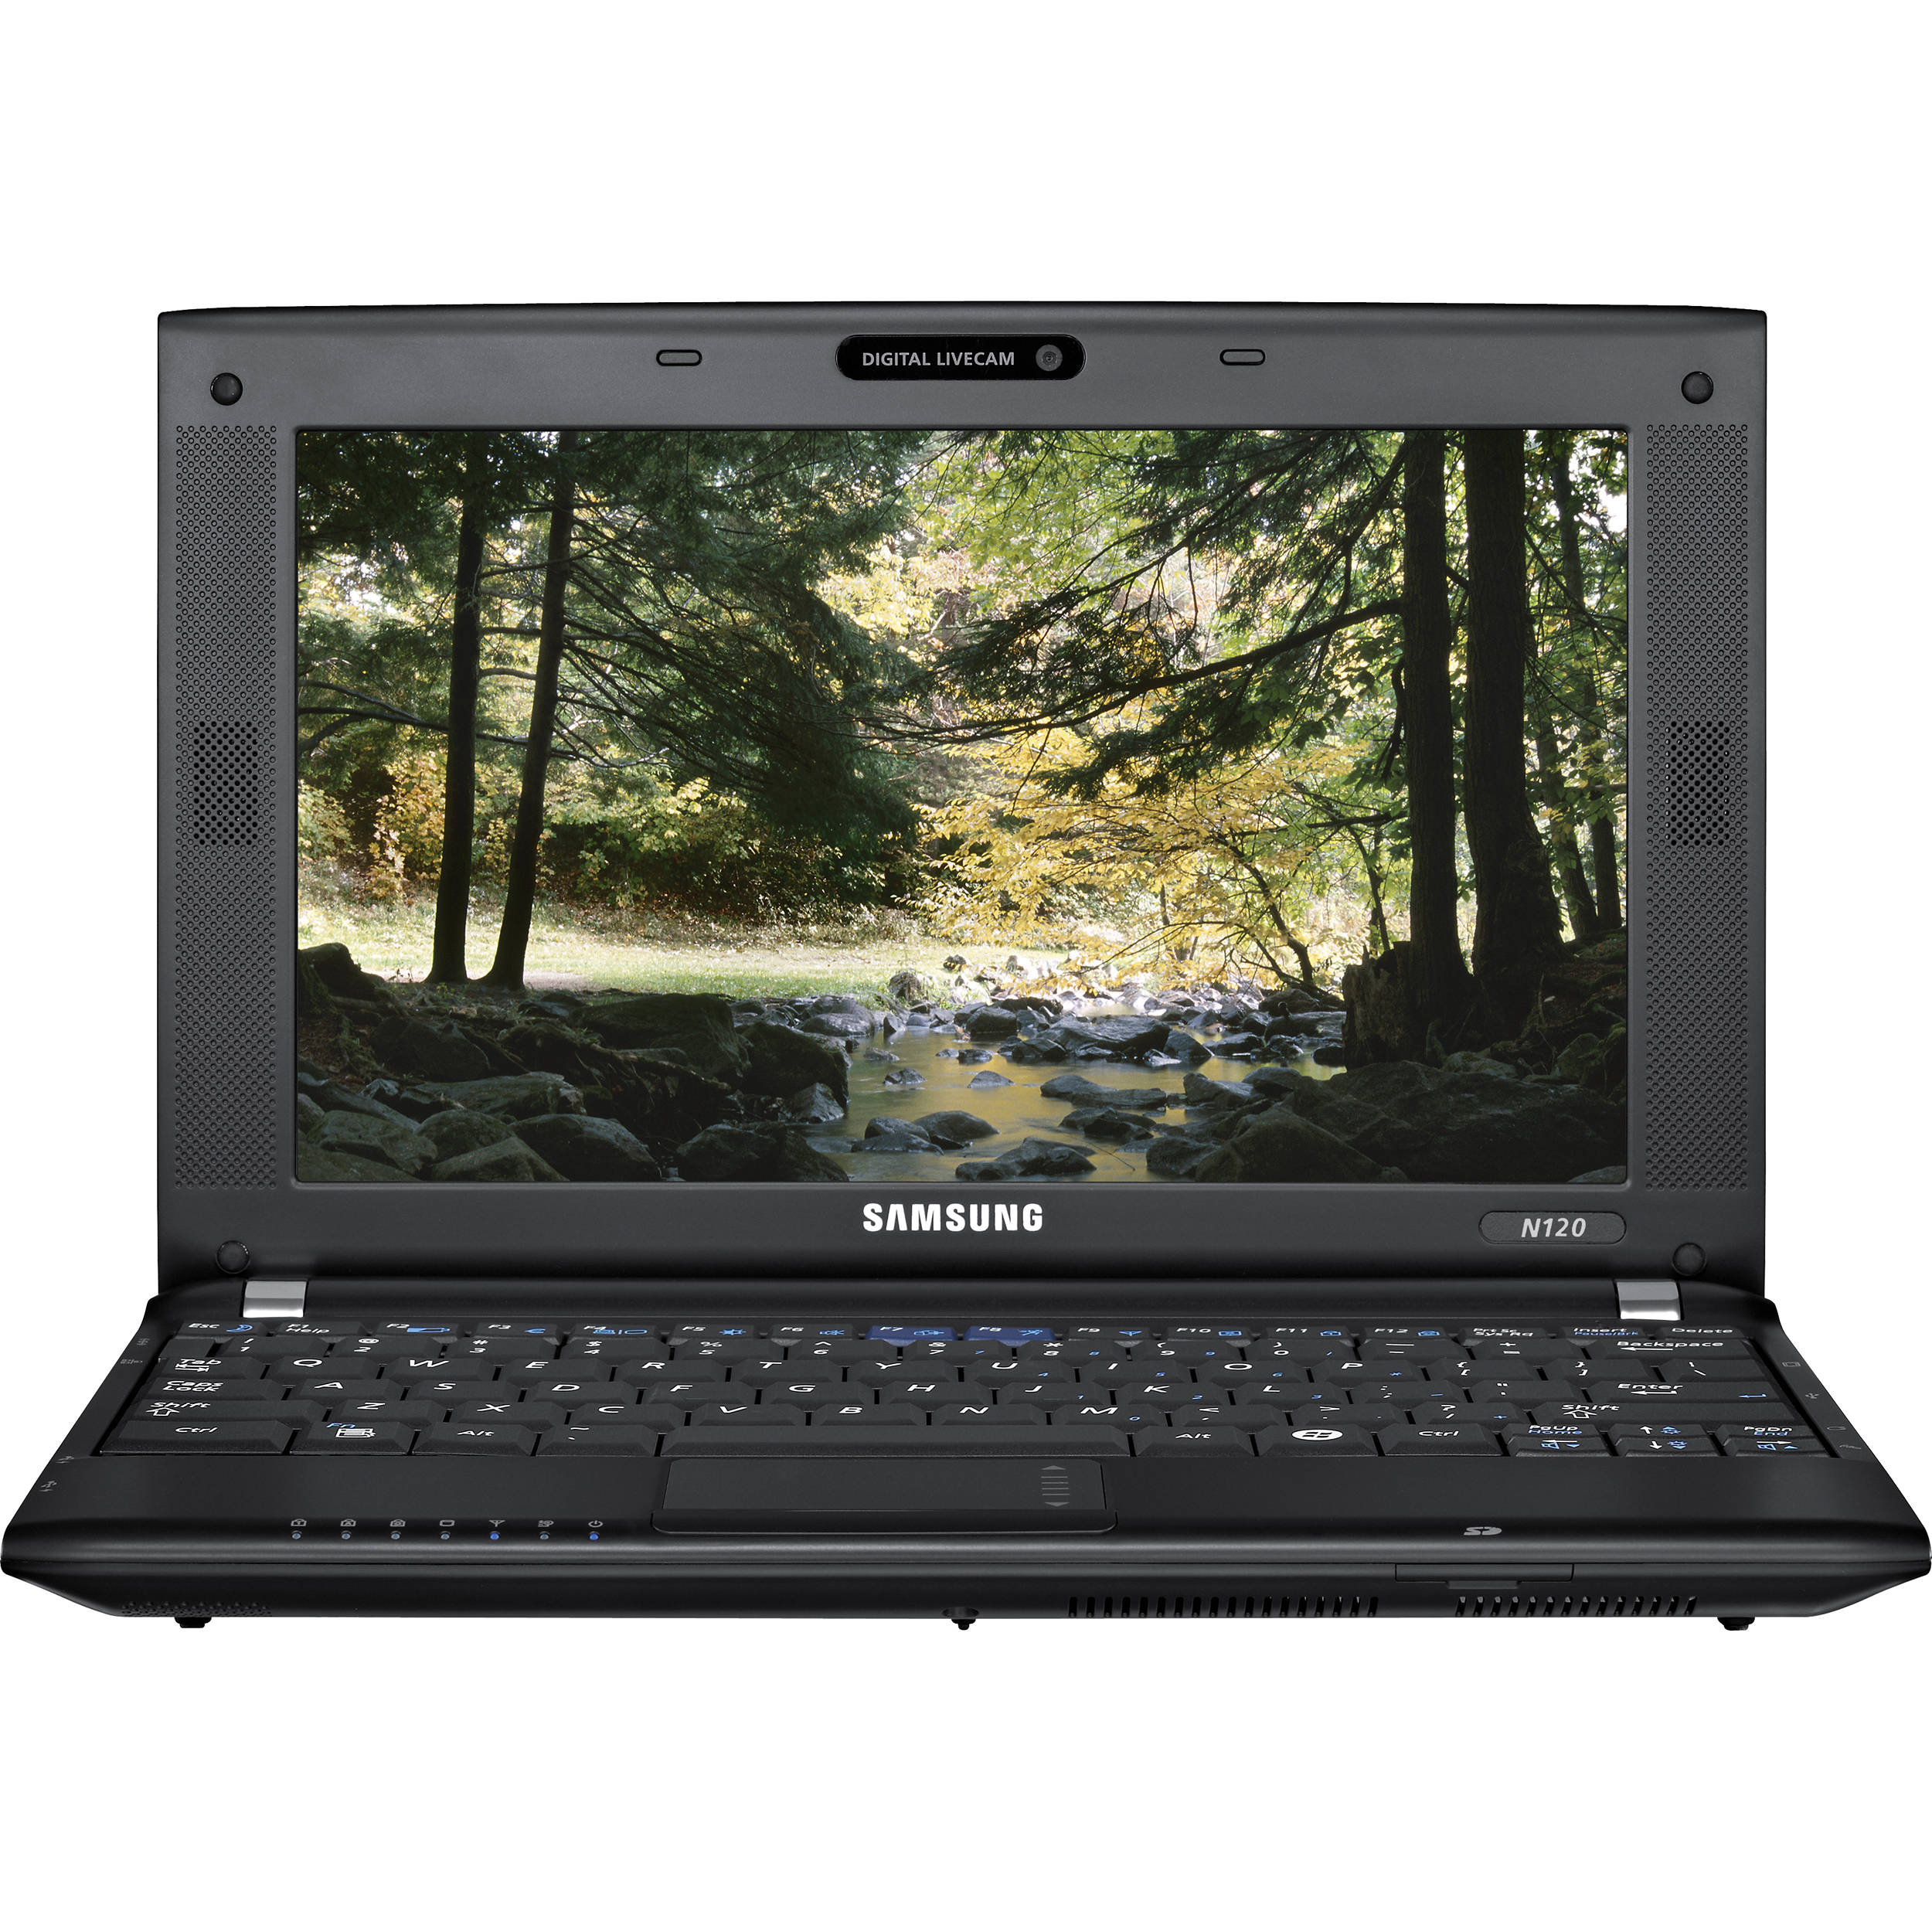 SAMSUNG NP-N120 DRIVERS FOR PC